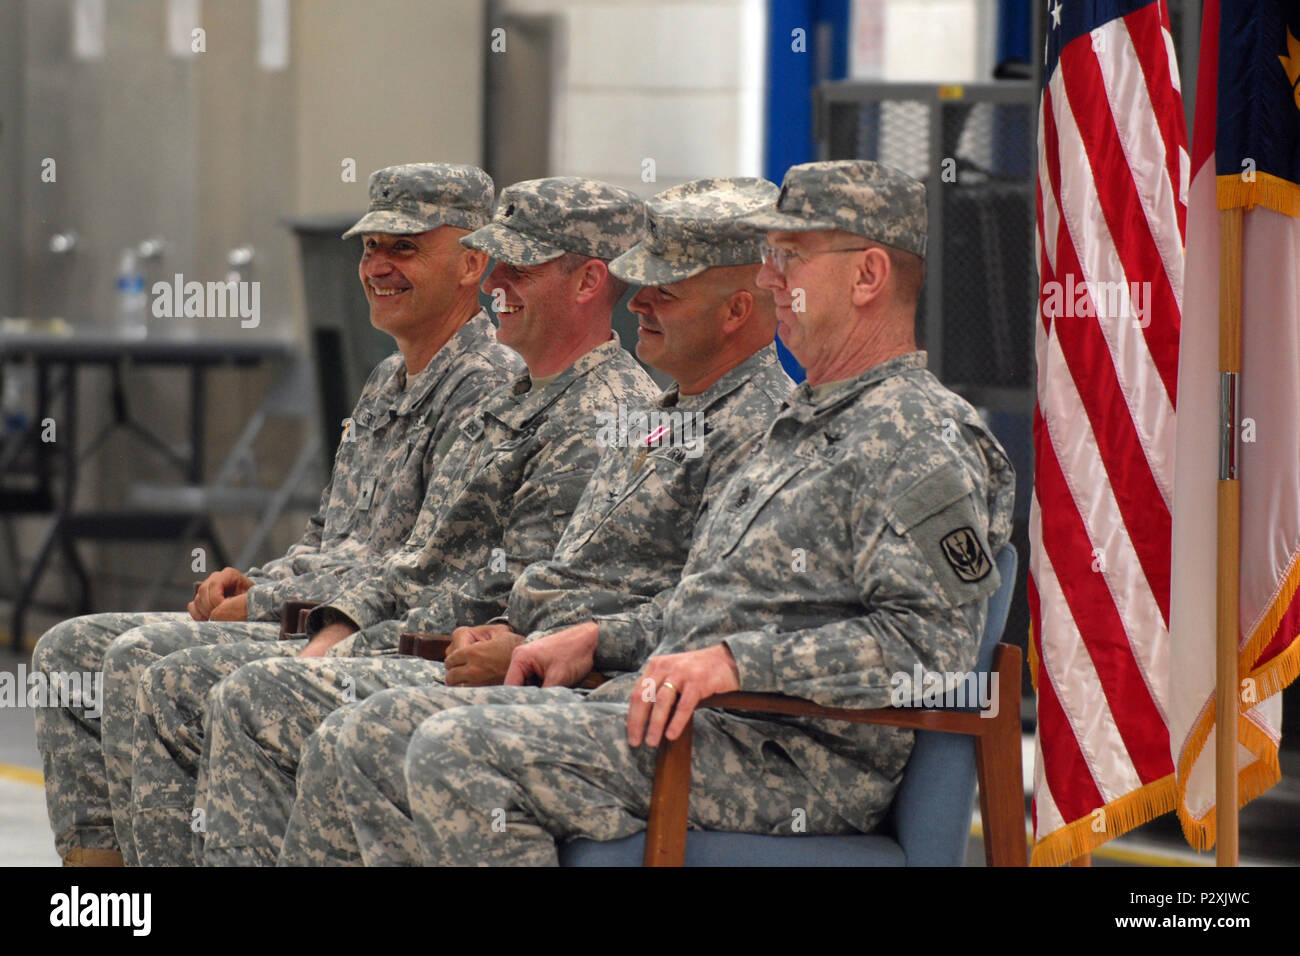 Brig. Gen. James C. Ernst, Lt. Col. Joseph W. Bishop, Col. Jeffrey L. Copeland and Command Sgt. Maj. Derwood L. Norris sit in the seats of honor during the change of command ceremony at the North Carolina Army National Guard's Army Aviation Support Facility 1 in Morrisville, N.C., on August 7, 2016. Bishop, who served previously as the commander of 1-130th Attack Reconnaissance Battalion, became commander of 449th Theater Aviation Brigade and Copeland has been promoted to Chief of Staff for the North Carolina Army National Guard. (U.S. Army National Guard photo by Staff Sgt. Meiling Gray, 449t Stock Photo